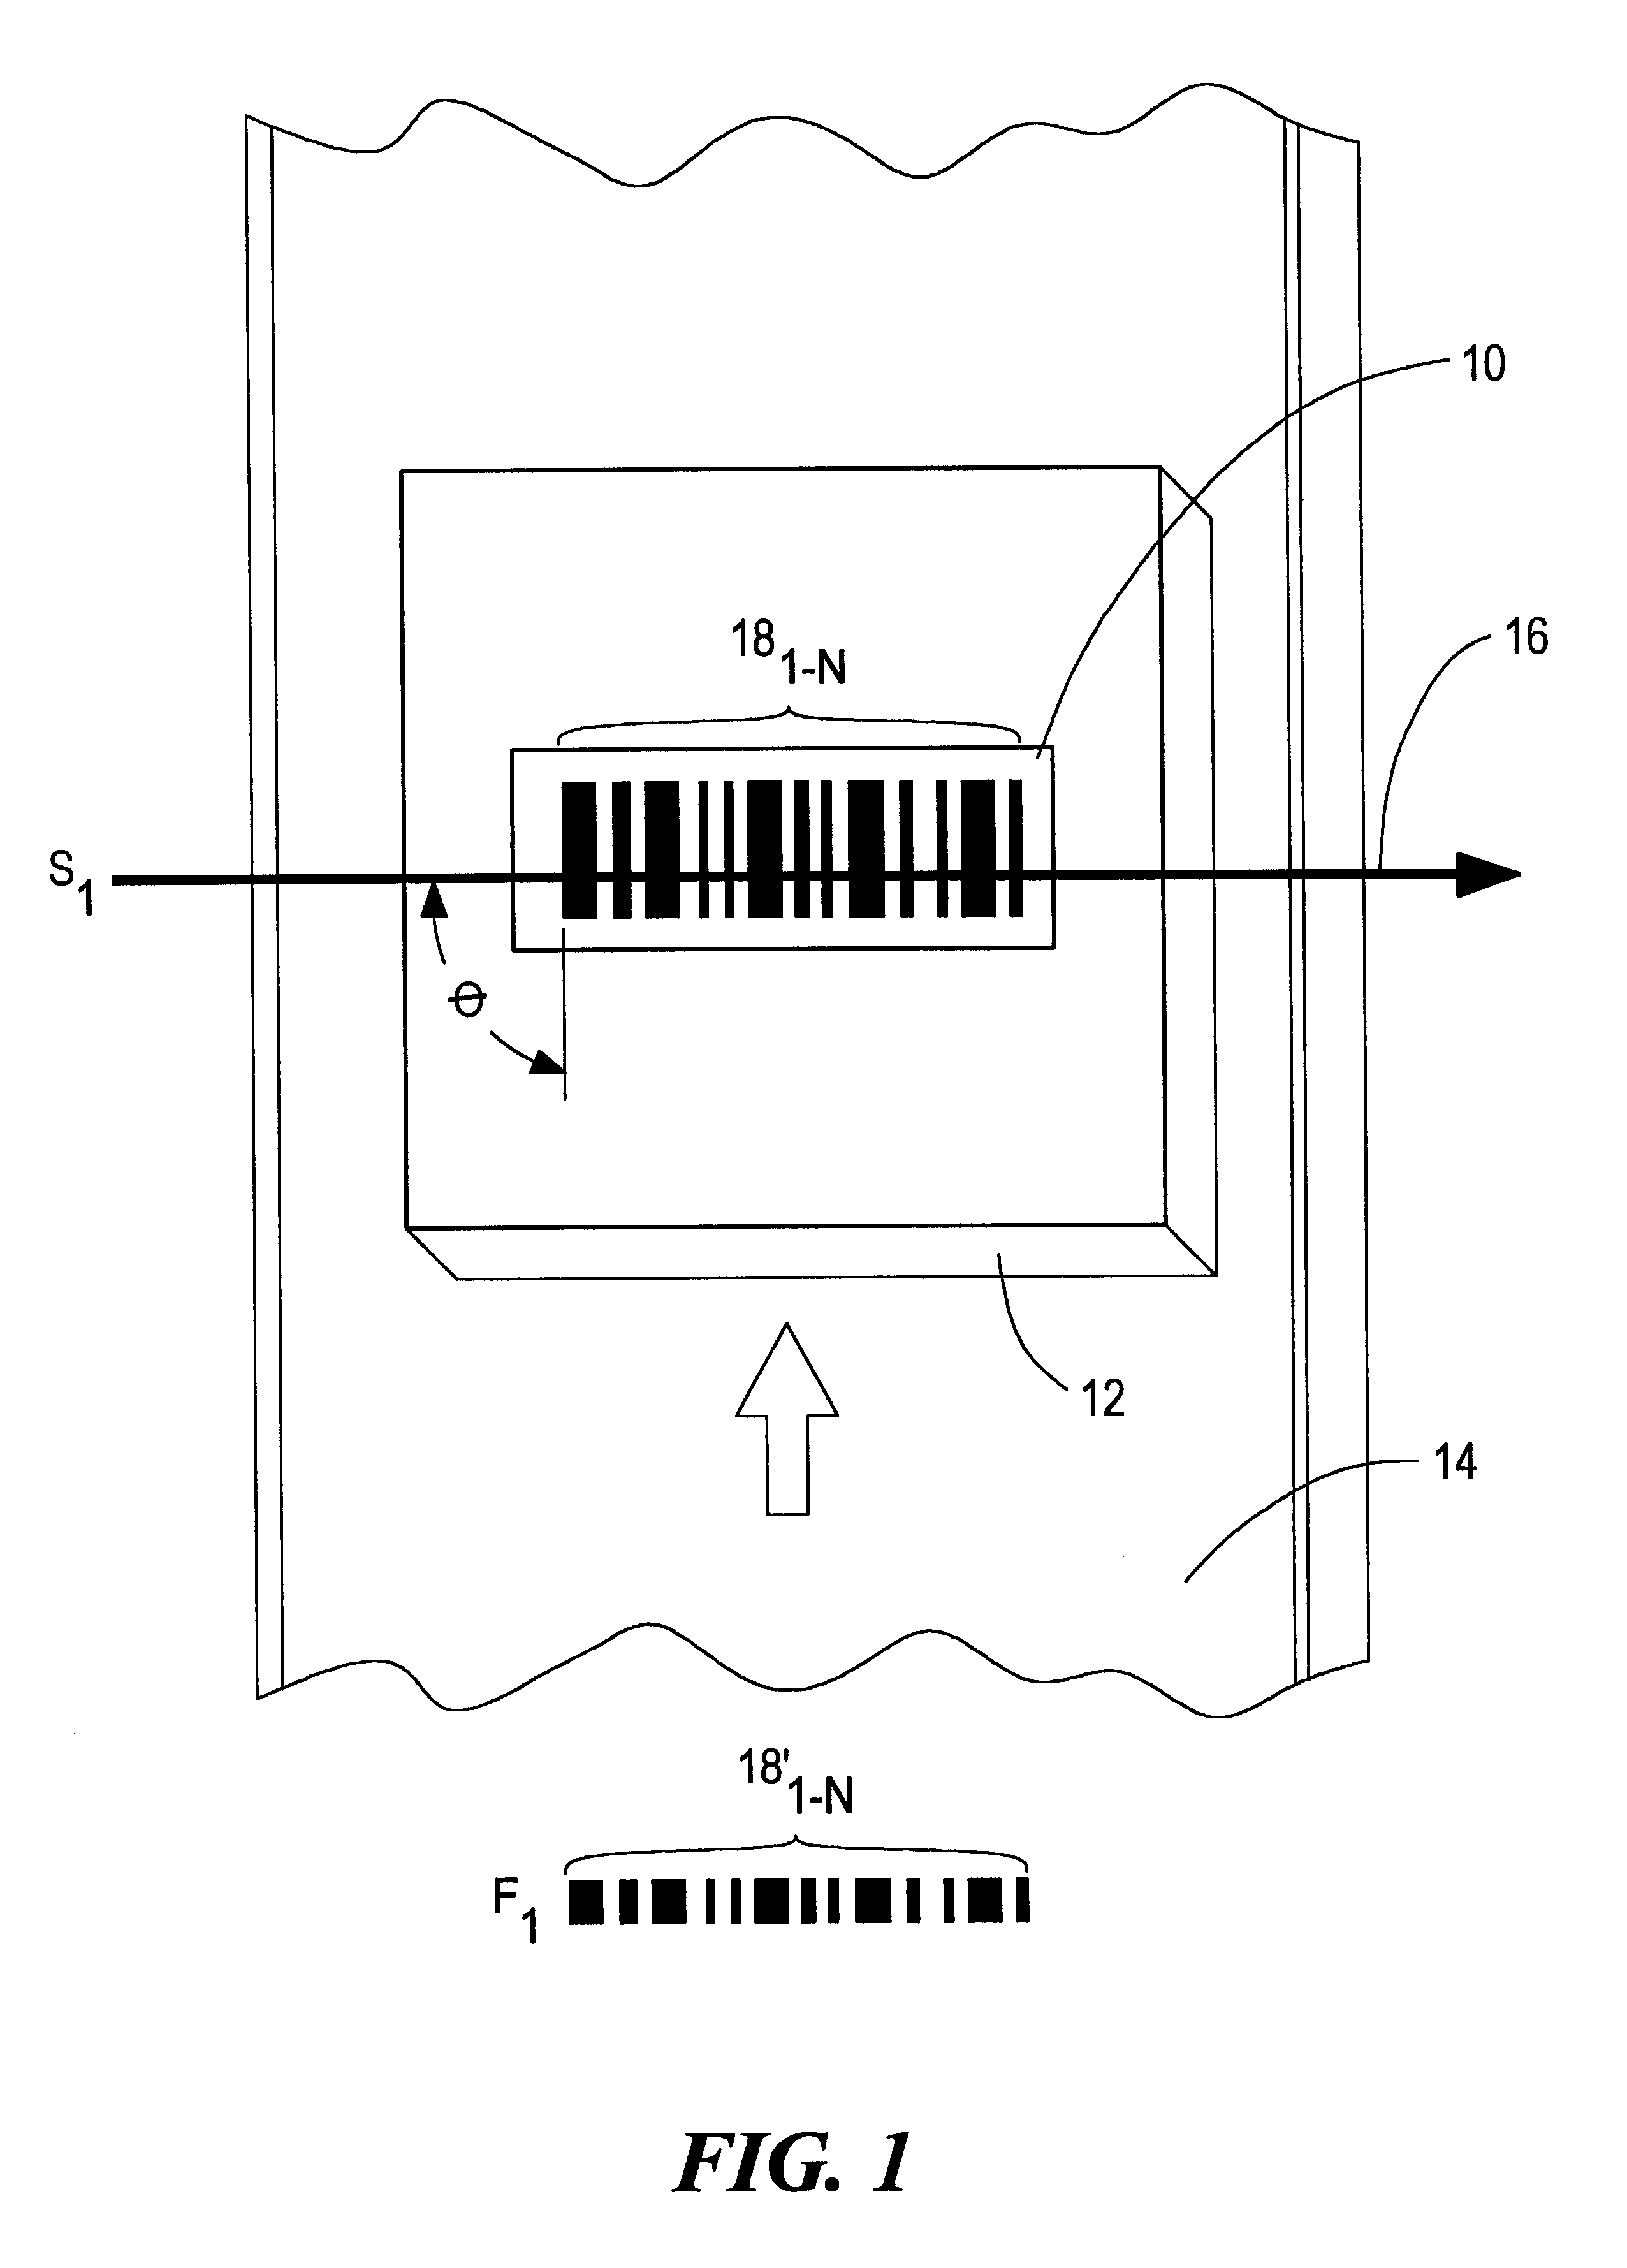 Bar code scanning system and method